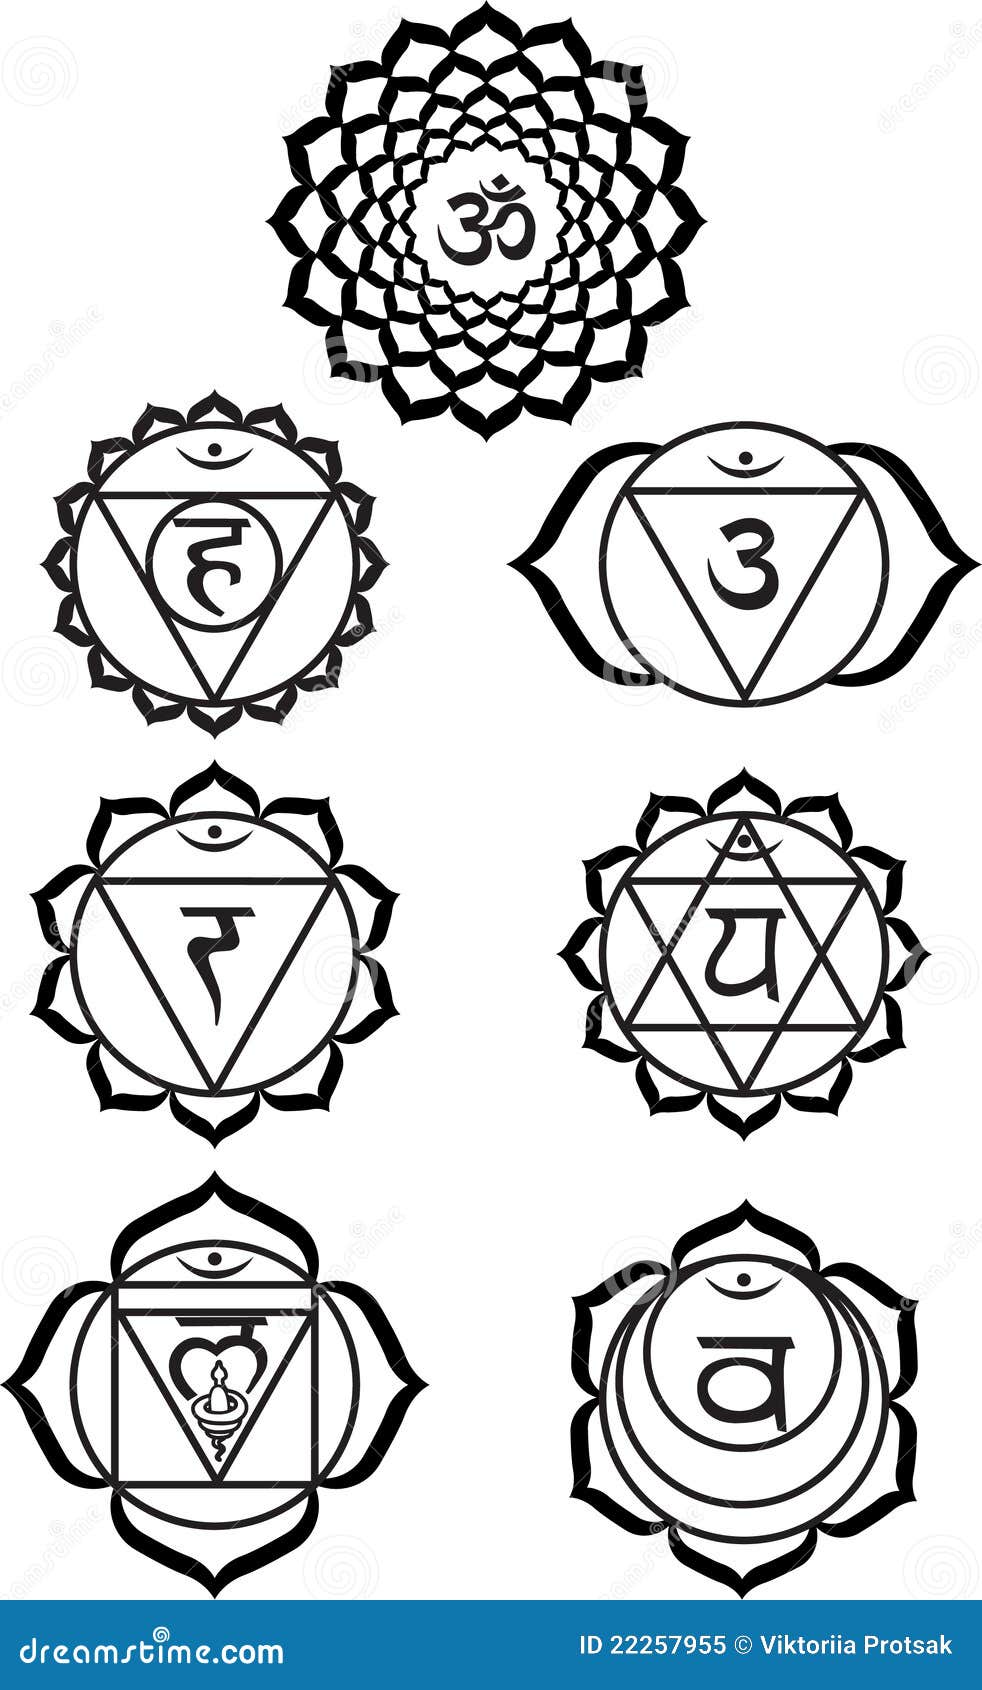 sacral chakra coloring pages - photo #40